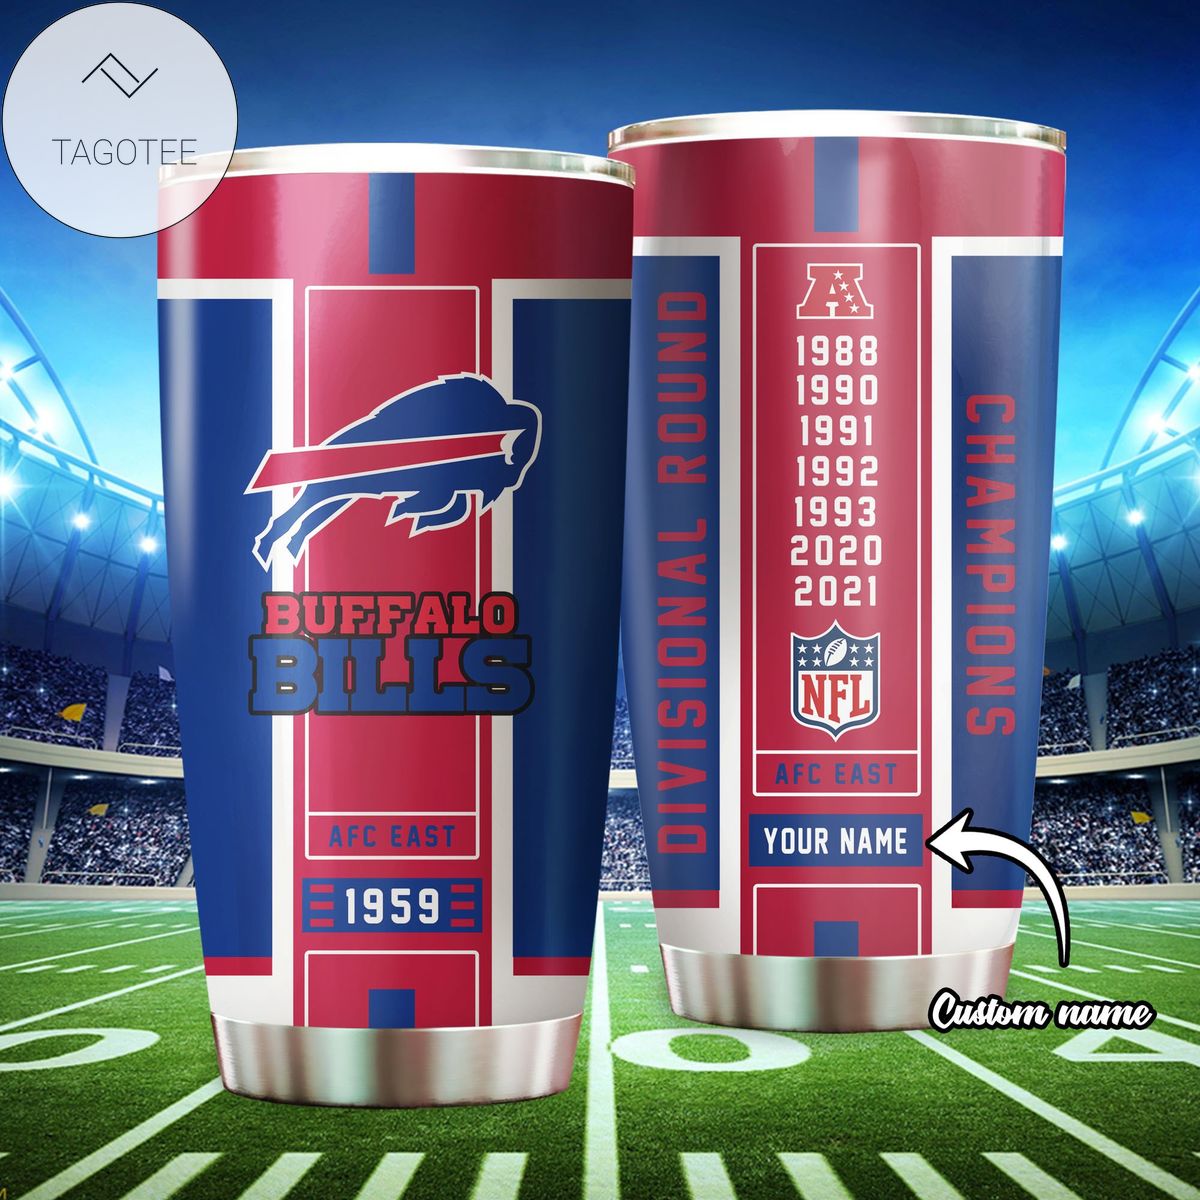 Buffalo Bills NFL 2021 Divisional Round Champions Custom Name Stainless Steel Tumblers Cup 20 oz Drinkware Personalized Gifts